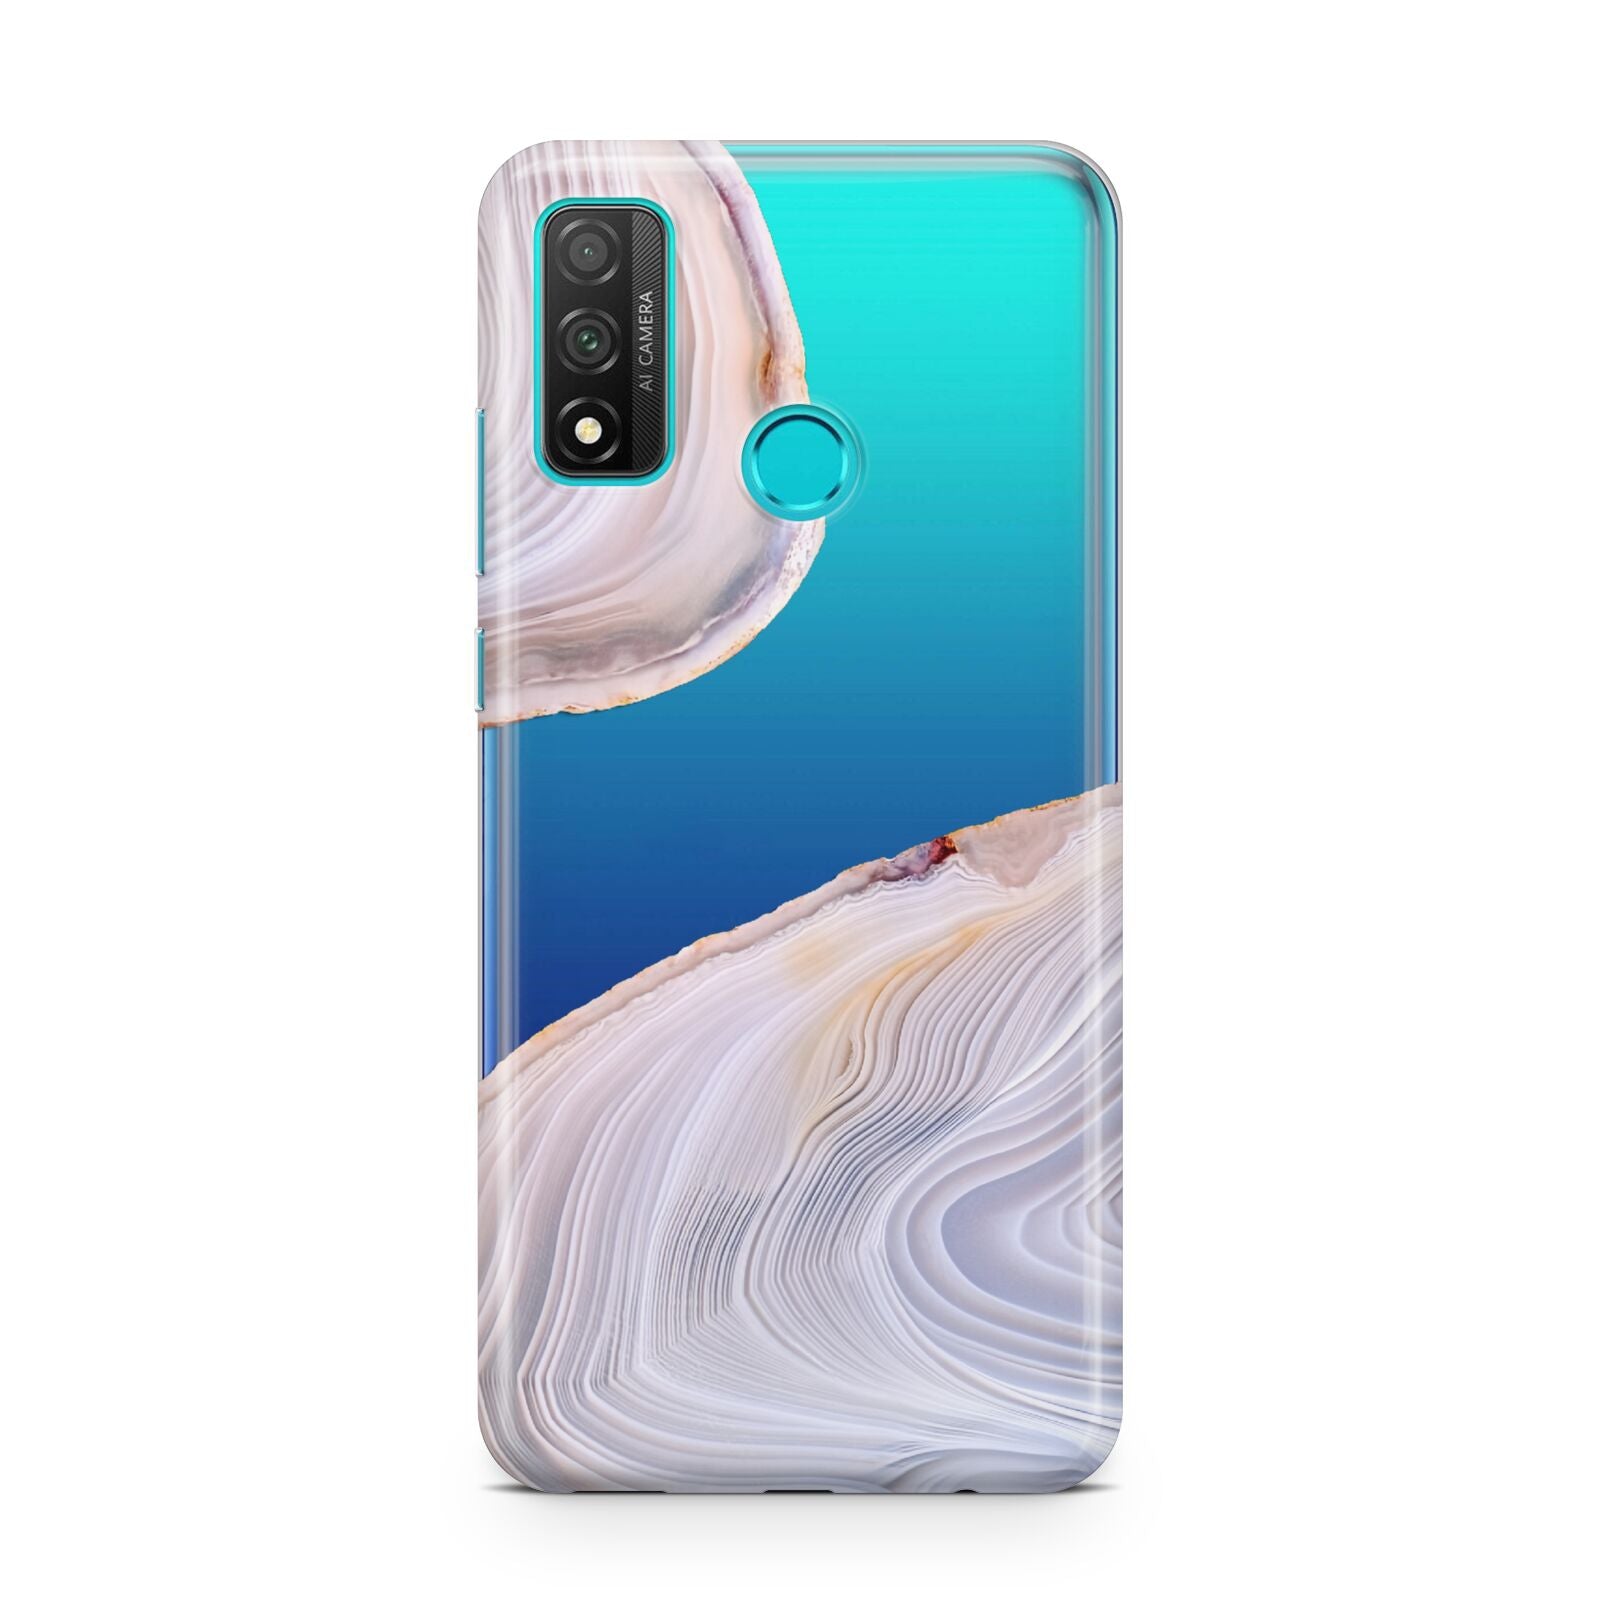 Agate Pale Pink and Blue Huawei P Smart 2020